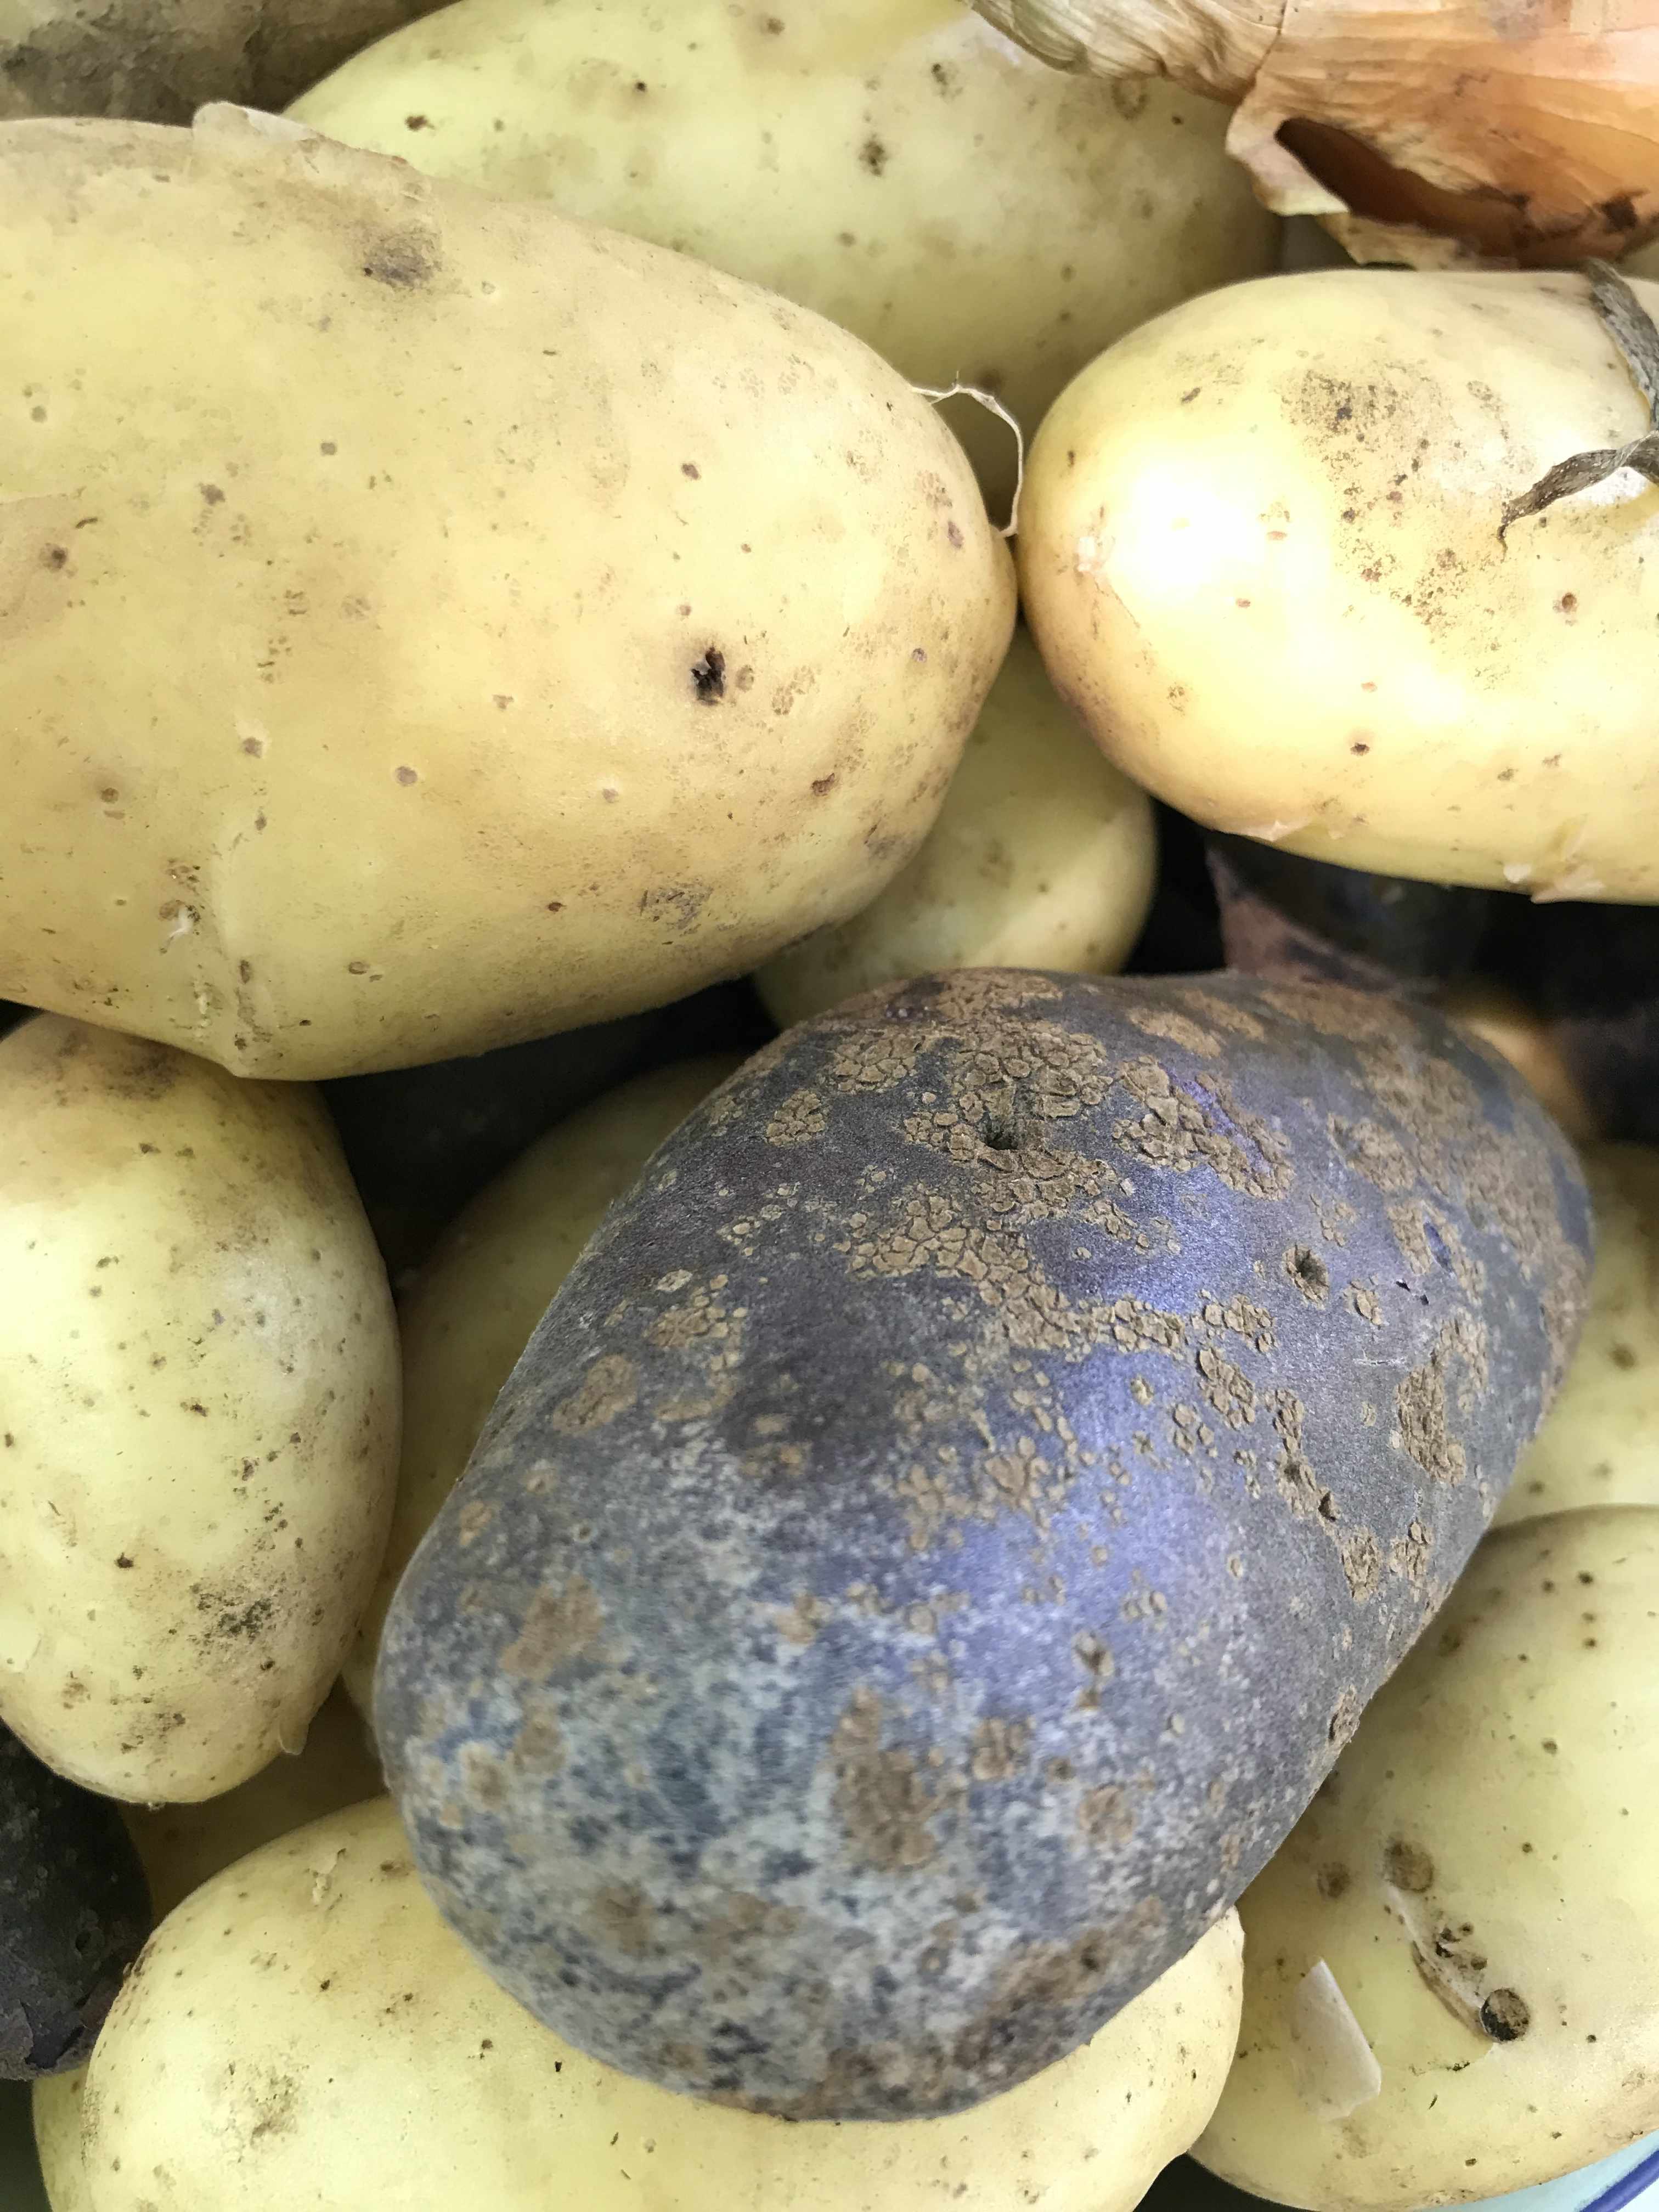 close up of yellow and purple potatoes. they are young potatoes and look very fresh with some dirt on them